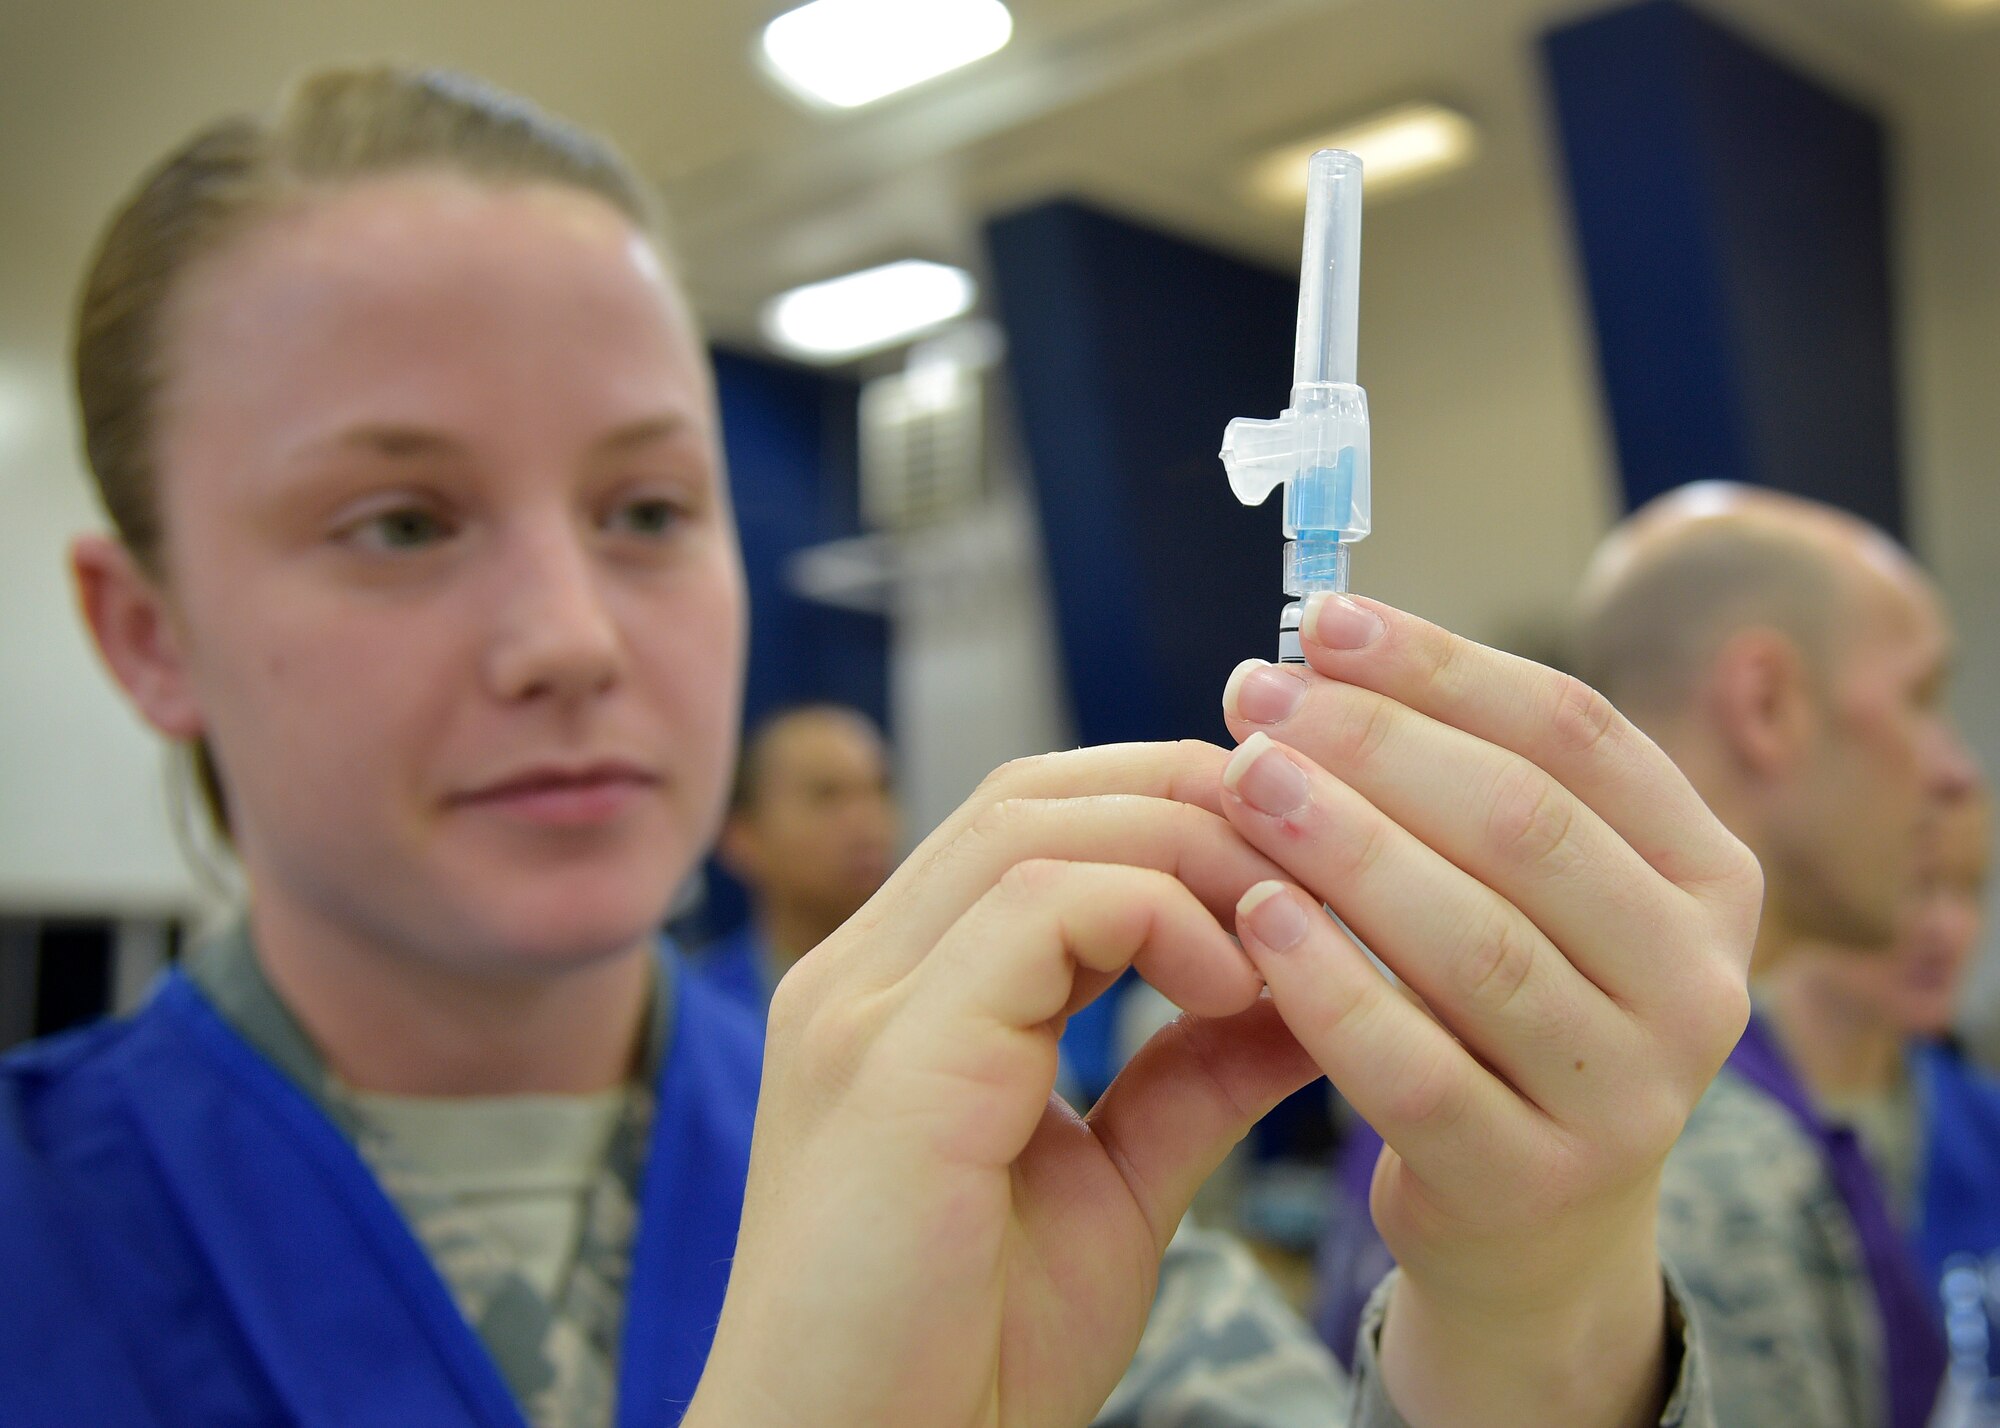 U.S. Air Force Senior Airman Ann Keyser, a bioenvironmental engineer with the 35th Aerospace Medicine Squadron, prepares a flu vaccine during the point of distribution, at Misawa Air Base, Japan, Nov. 3, 2016. This was the first time family members attended a flu line, which tested 35th Medical Group member’s readiness for all personnel on base. Medical experts also administered vaccines for 36 consecutive hours to account for all schedules Team Misawa members may have. (U.S. Air Force photo by Senior Airman Deana Heitzman)